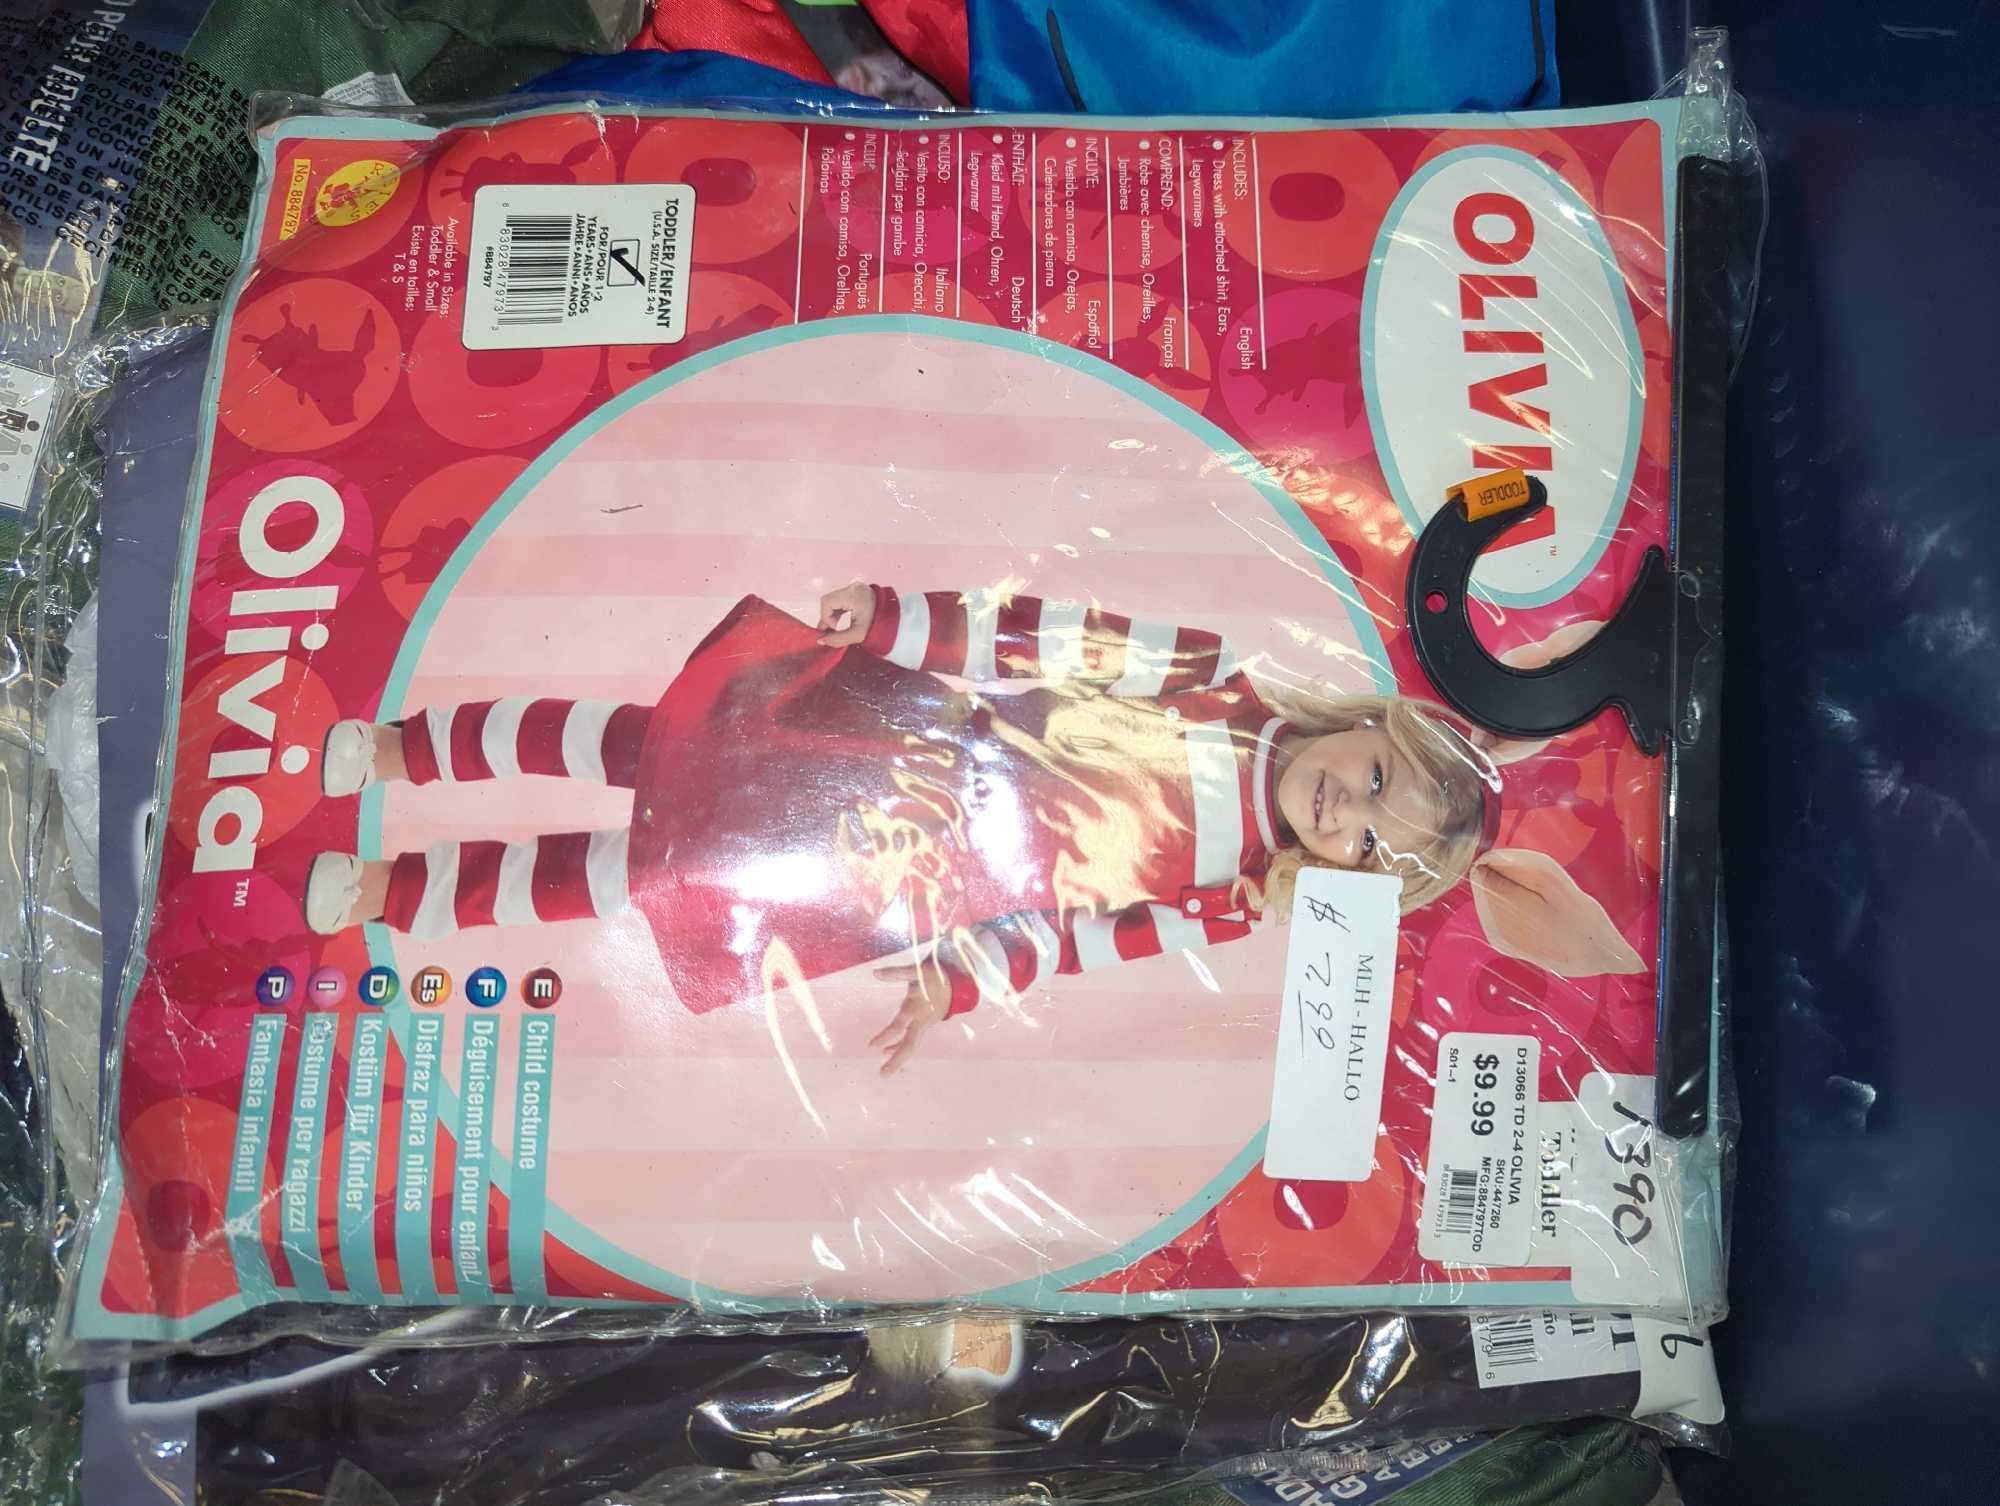 Tote Lot of Assorted Halloween Costumes Ranging From Toddler Size to Medium Adult Size including